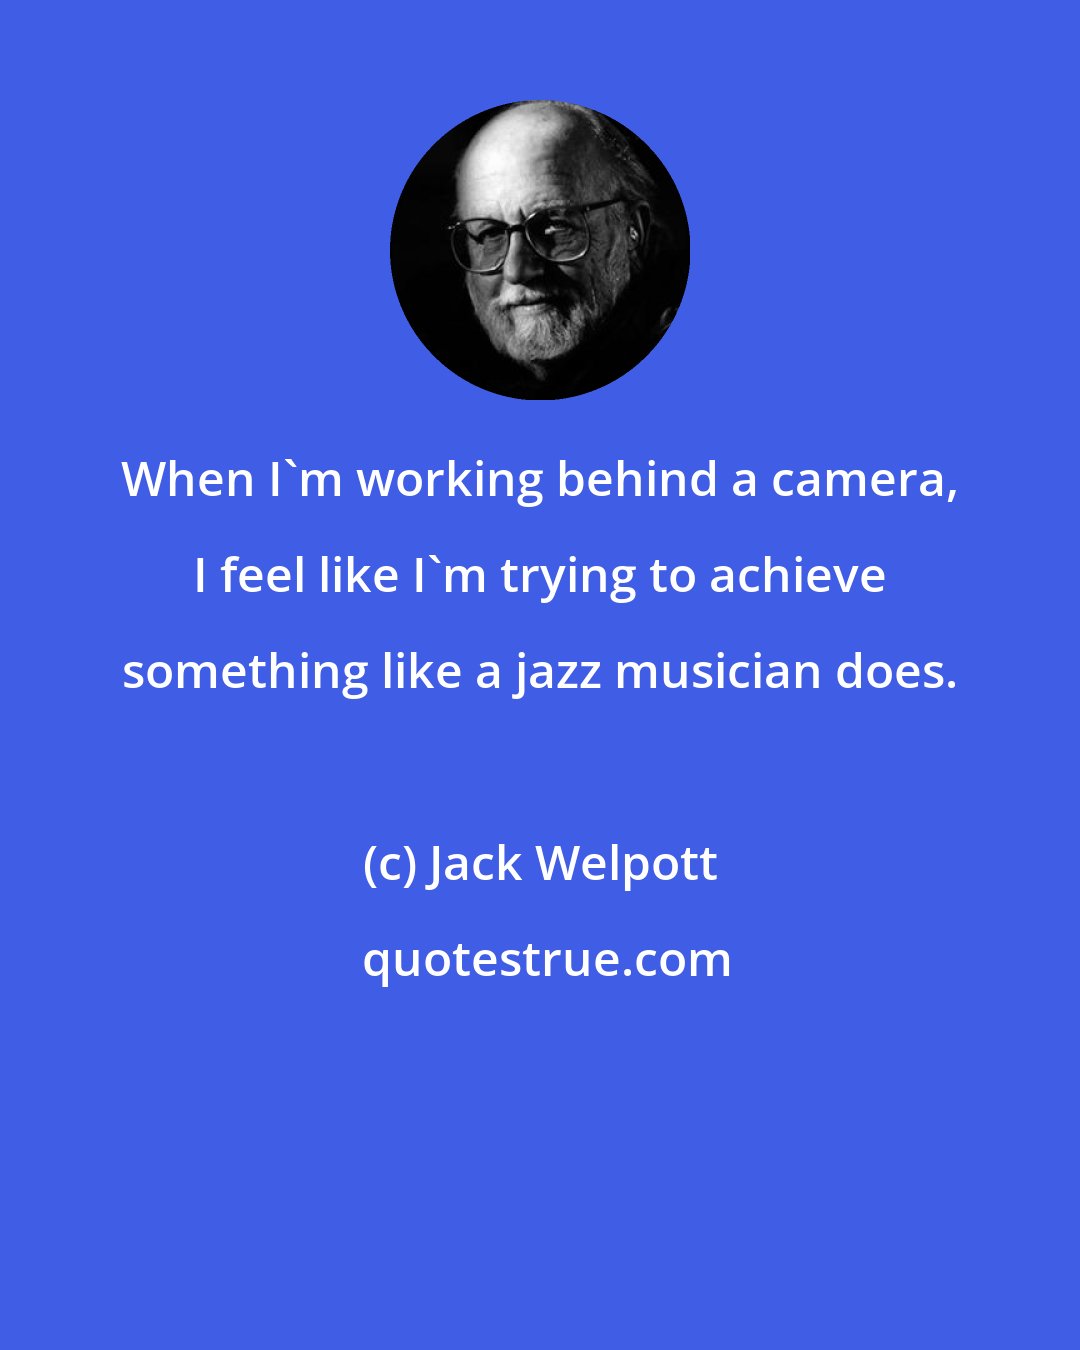 Jack Welpott: When I'm working behind a camera, I feel like I'm trying to achieve something like a jazz musician does.